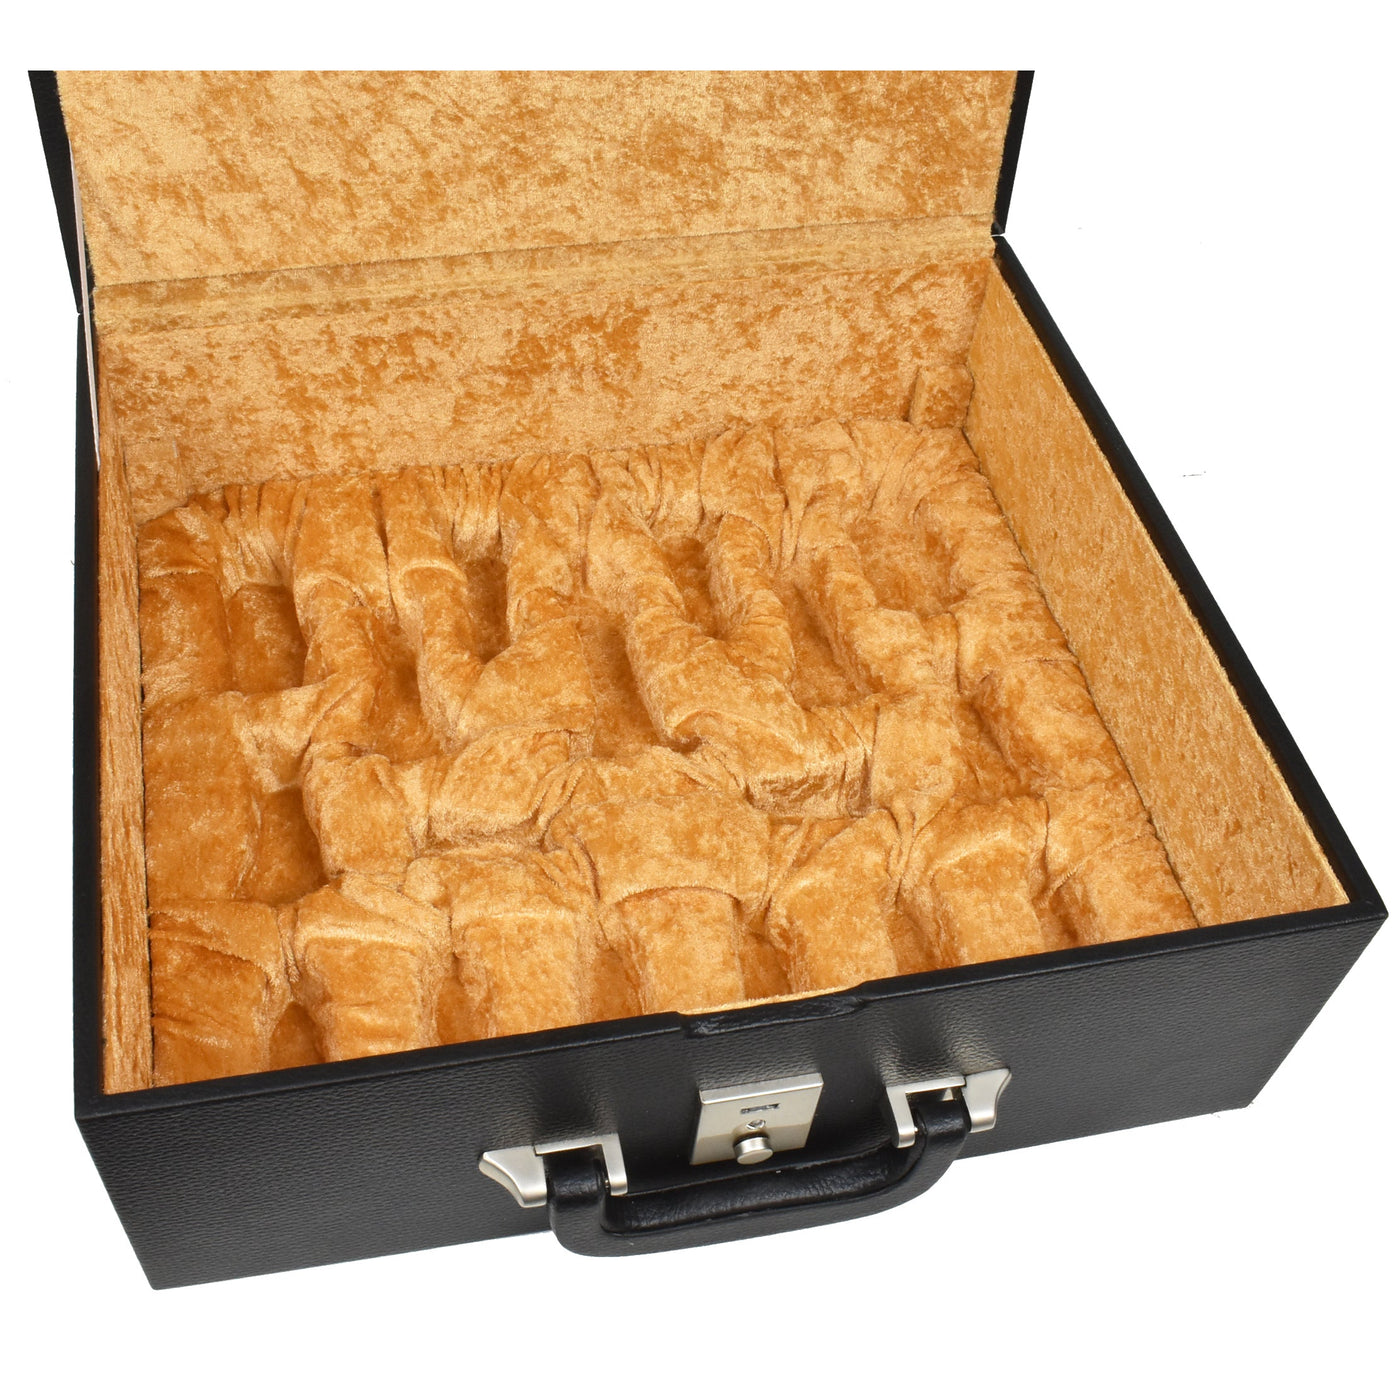 4.1″ Stallion Staunton Luxury Bud Rose Wood Chess Pieces with 23" Bud Rosewood & Maple Wood Signature Wooden Chessboard and Leatherette Coffer Storage Box